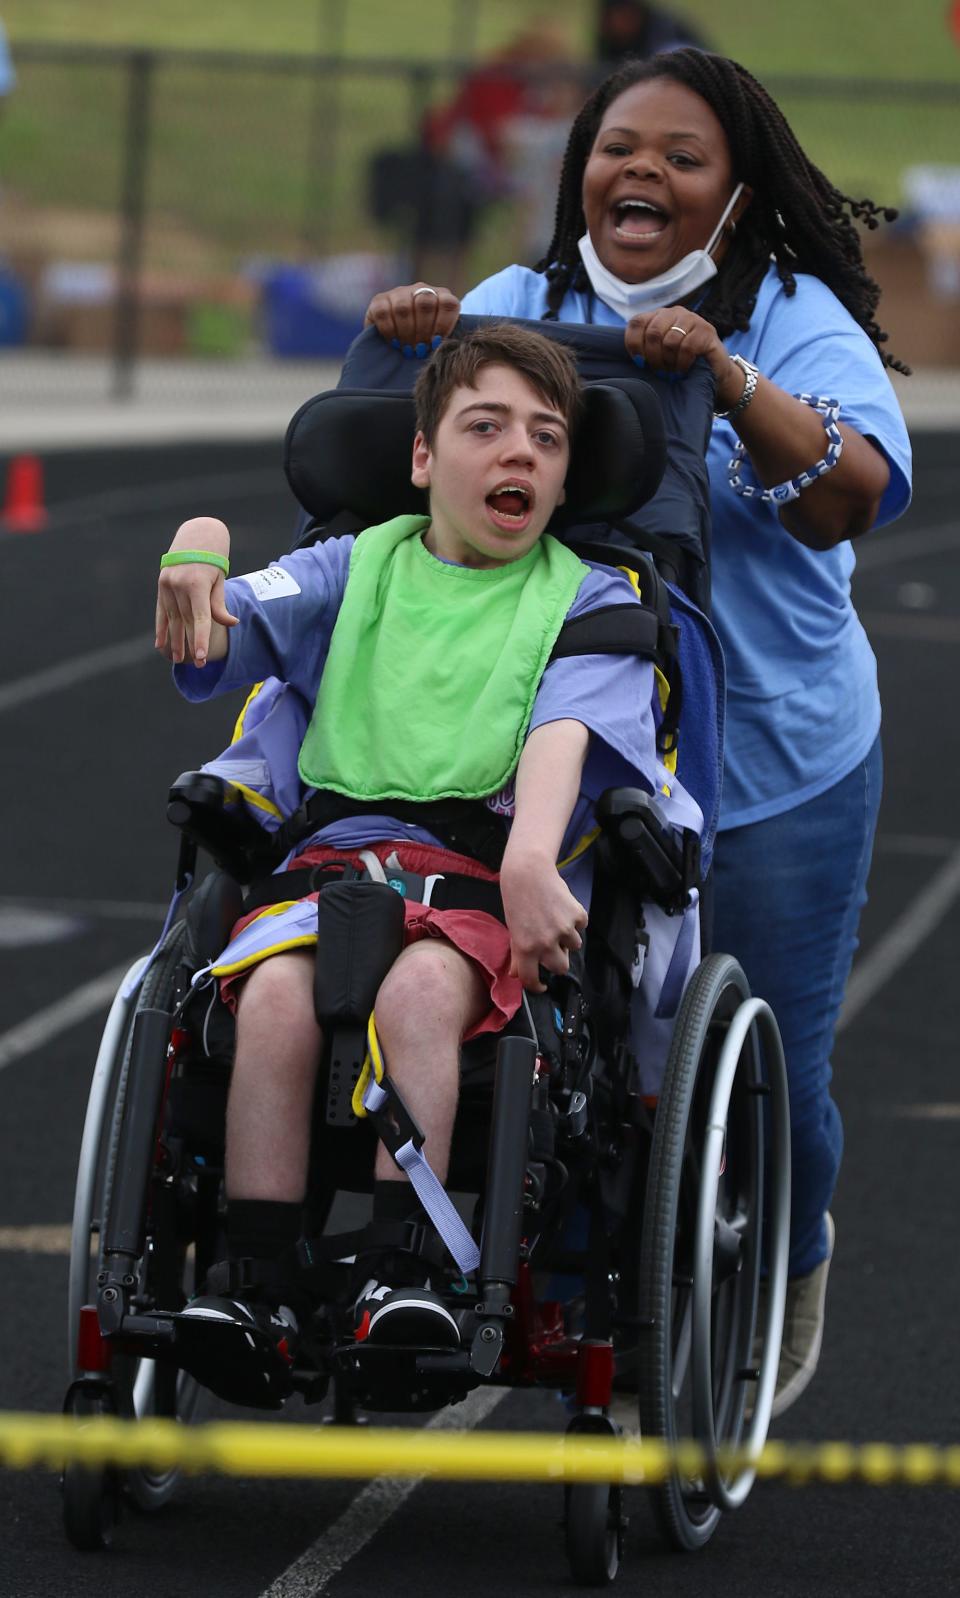 Cassandra Houston and James Dunn race to the finish during the Gaston County Special Olympics Spring Games held Friday morning, May 6, 2022, at Stuart Cramer High School.